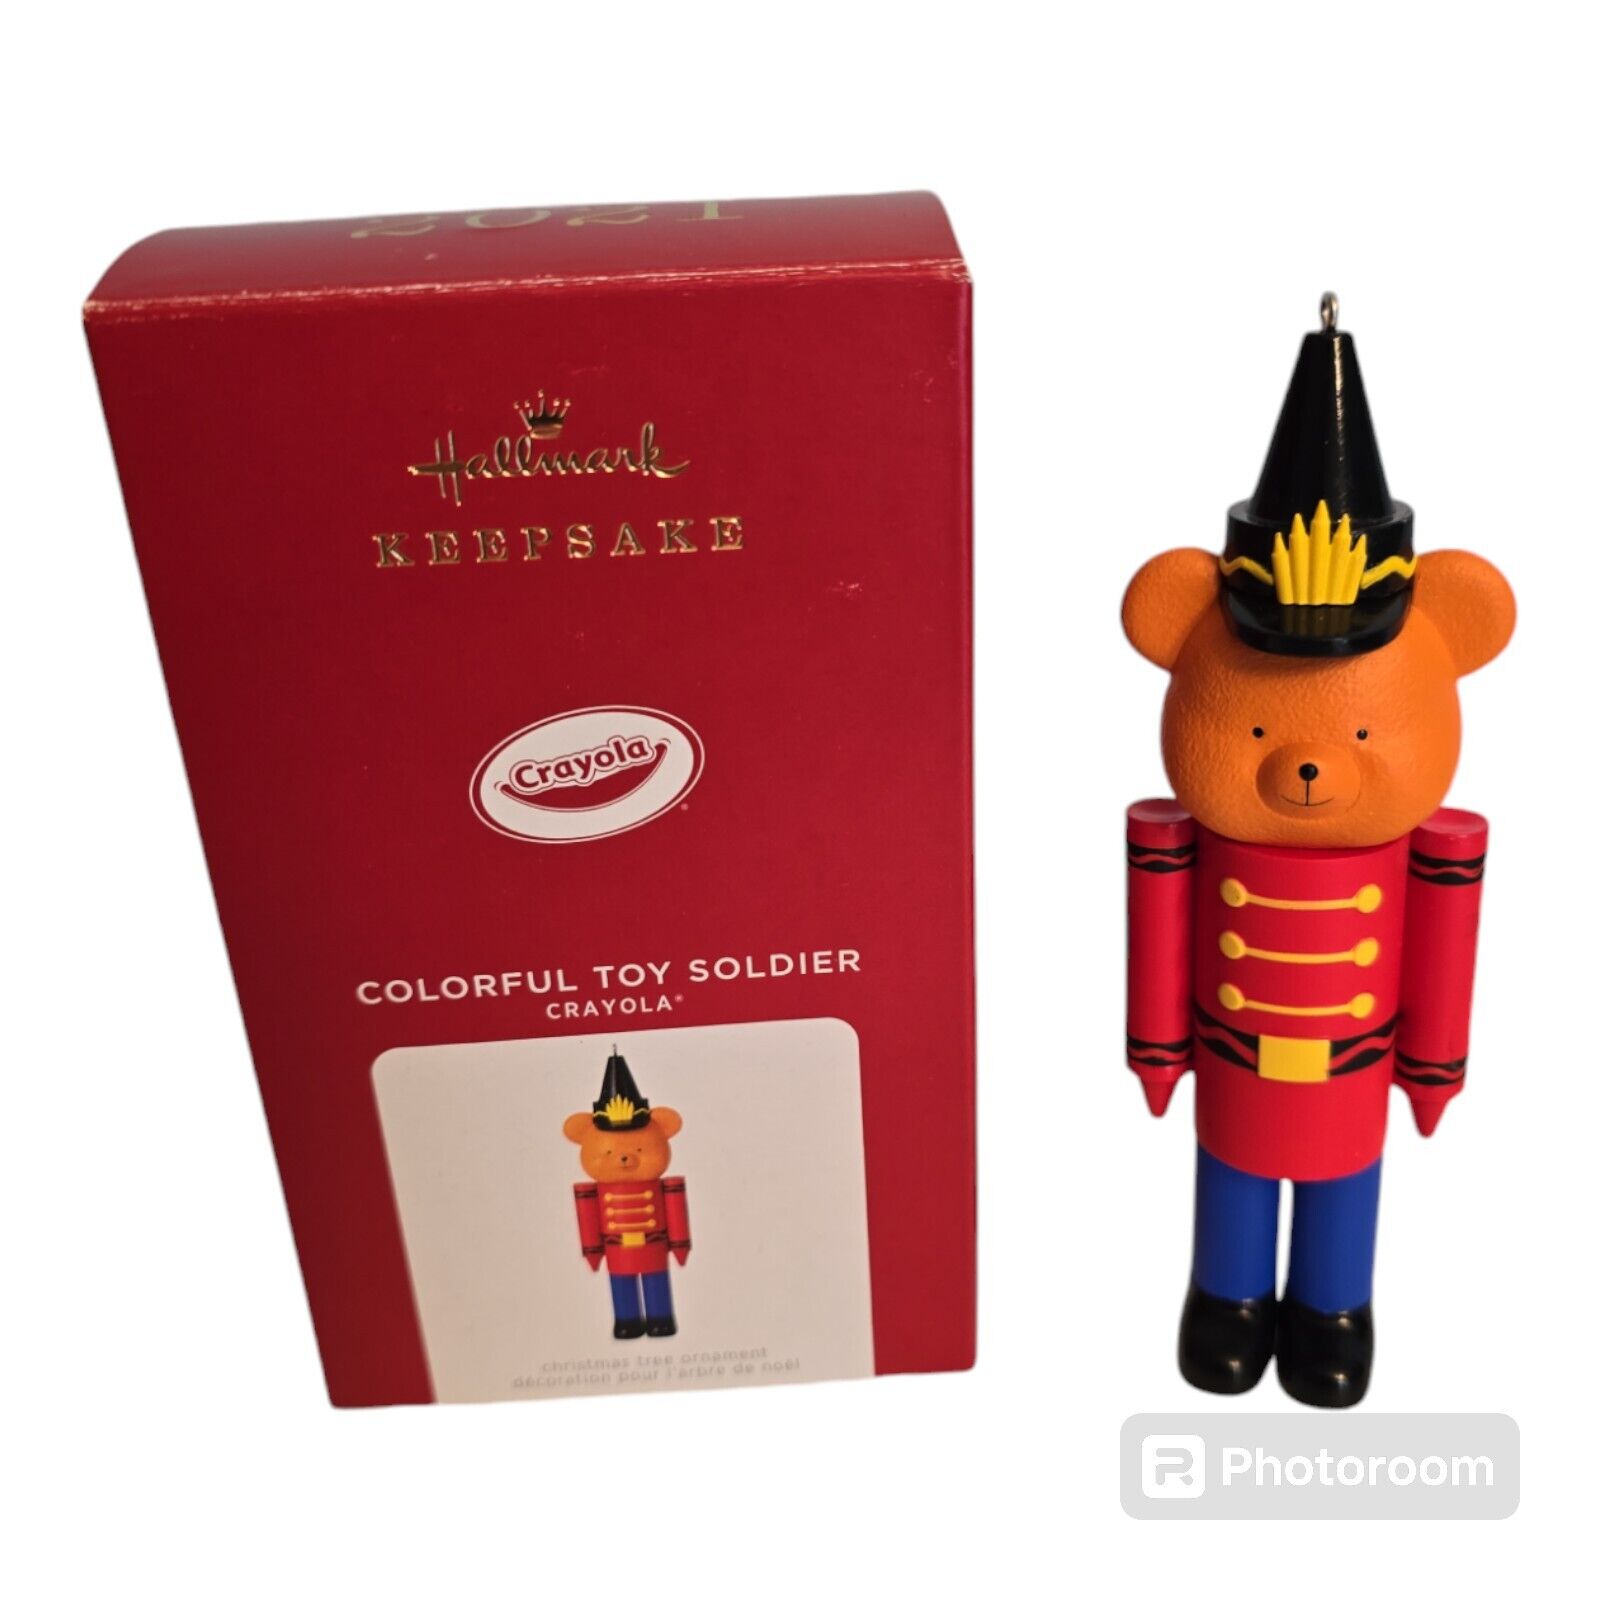 2021 Hallmark Crayola Colorful Toy Soldier Bear Christmas Ornament with Box